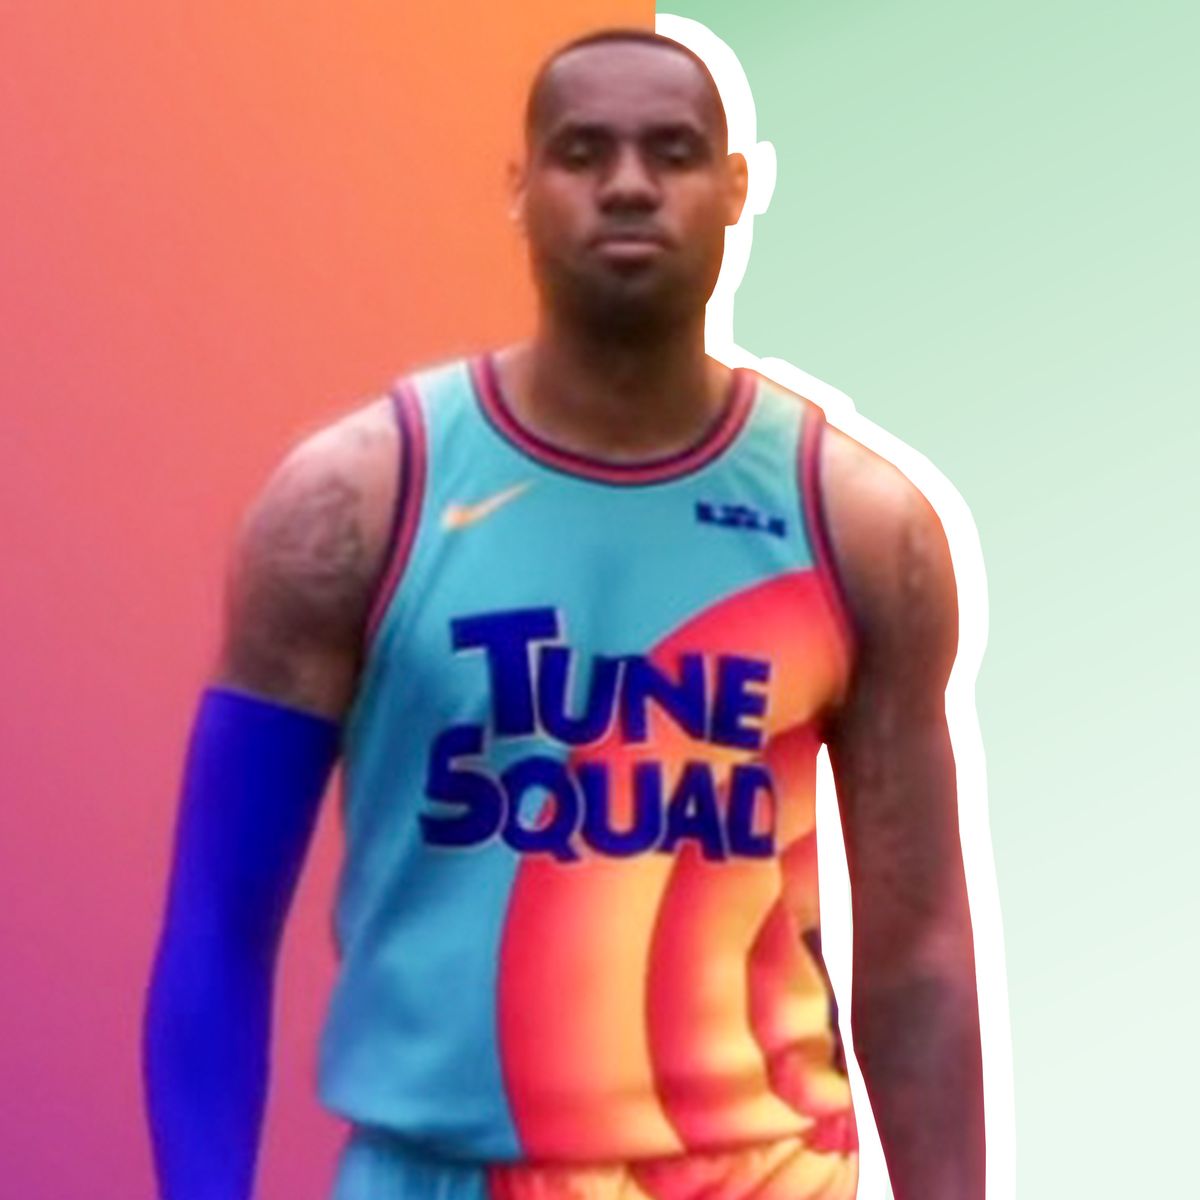 Hallowcos Space Jam 2: A New Legacy LeBron James Tune Squad Basketball  Jersey